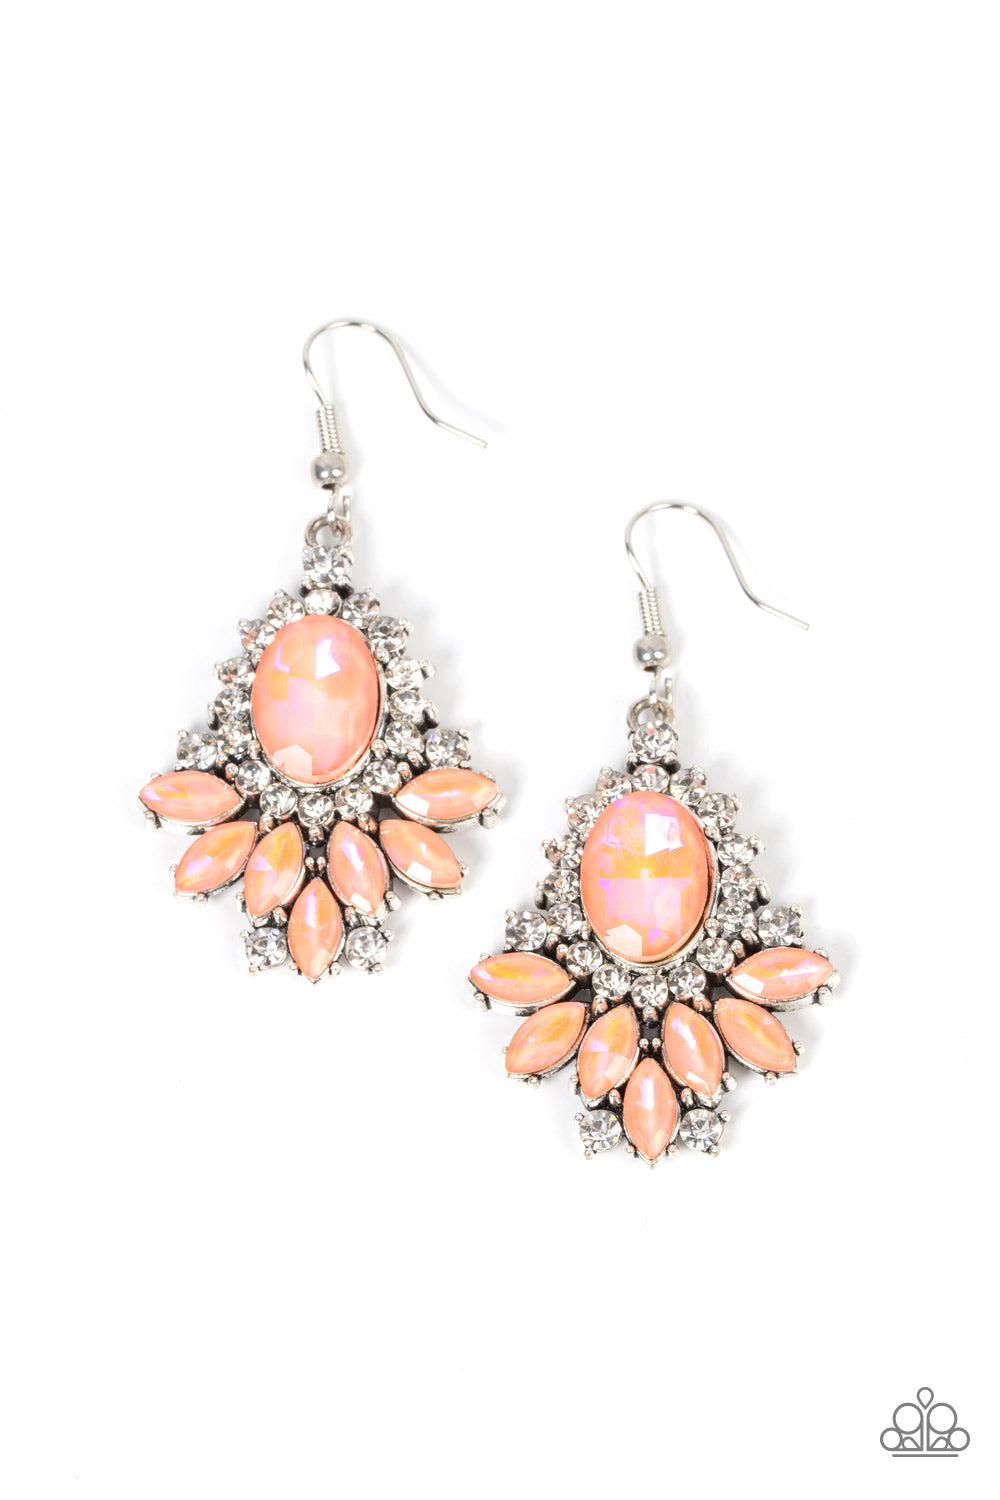 Magic Spell Sparkle Coral Orange Rhinestone Earrings - Paparazzi Accessories- lightbox - CarasShop.com - $5 Jewelry by Cara Jewels